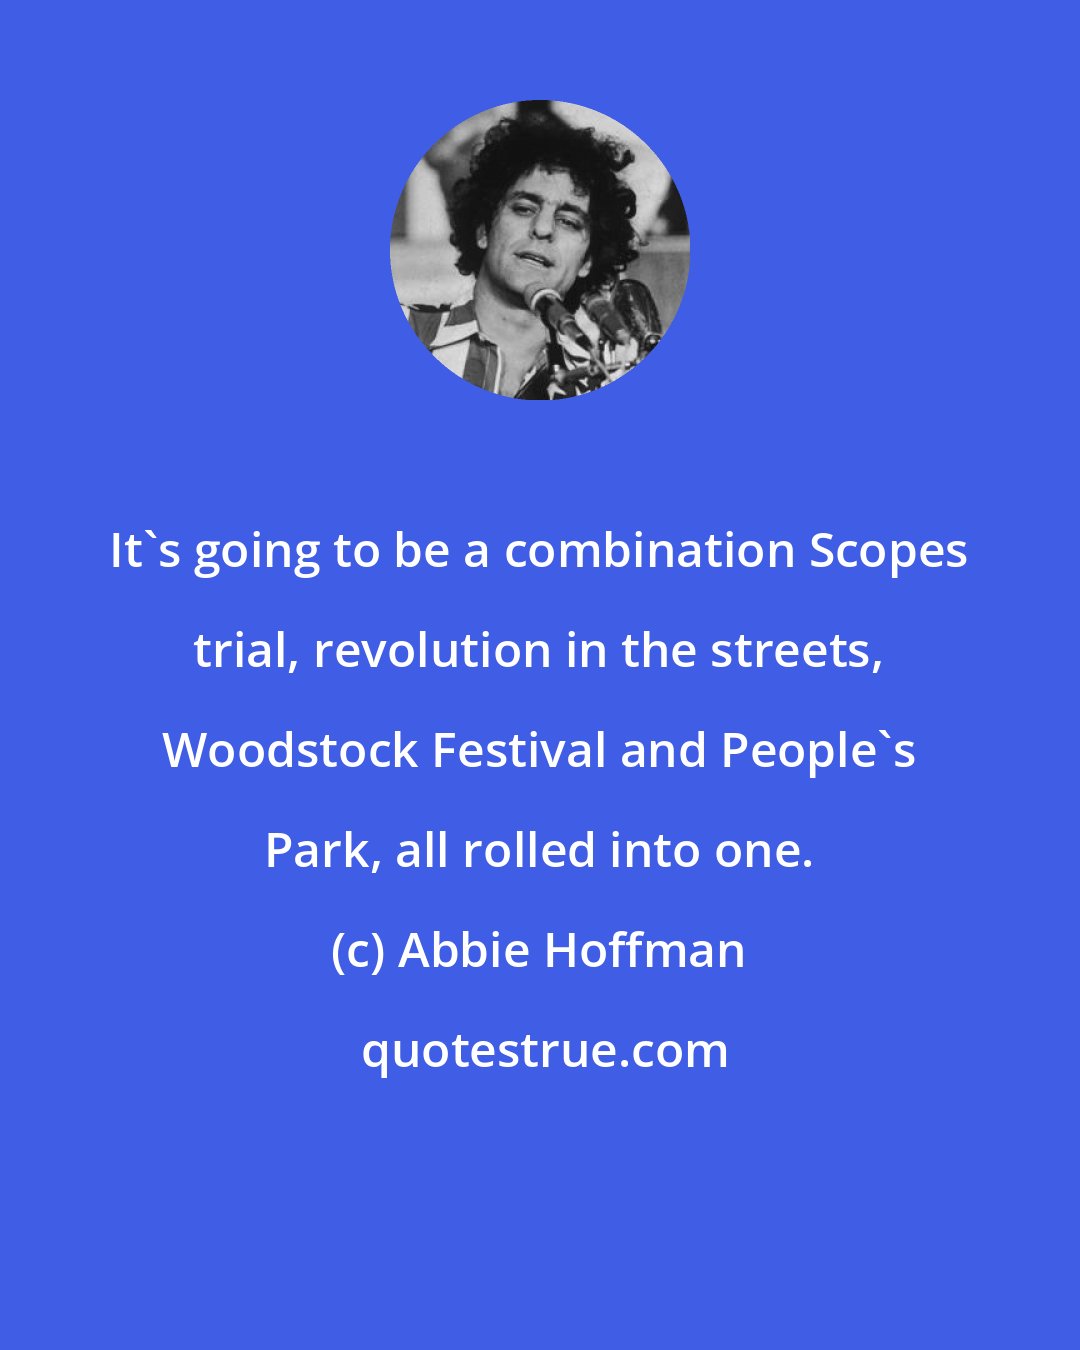 Abbie Hoffman: It's going to be a combination Scopes trial, revolution in the streets, Woodstock Festival and People's Park, all rolled into one.